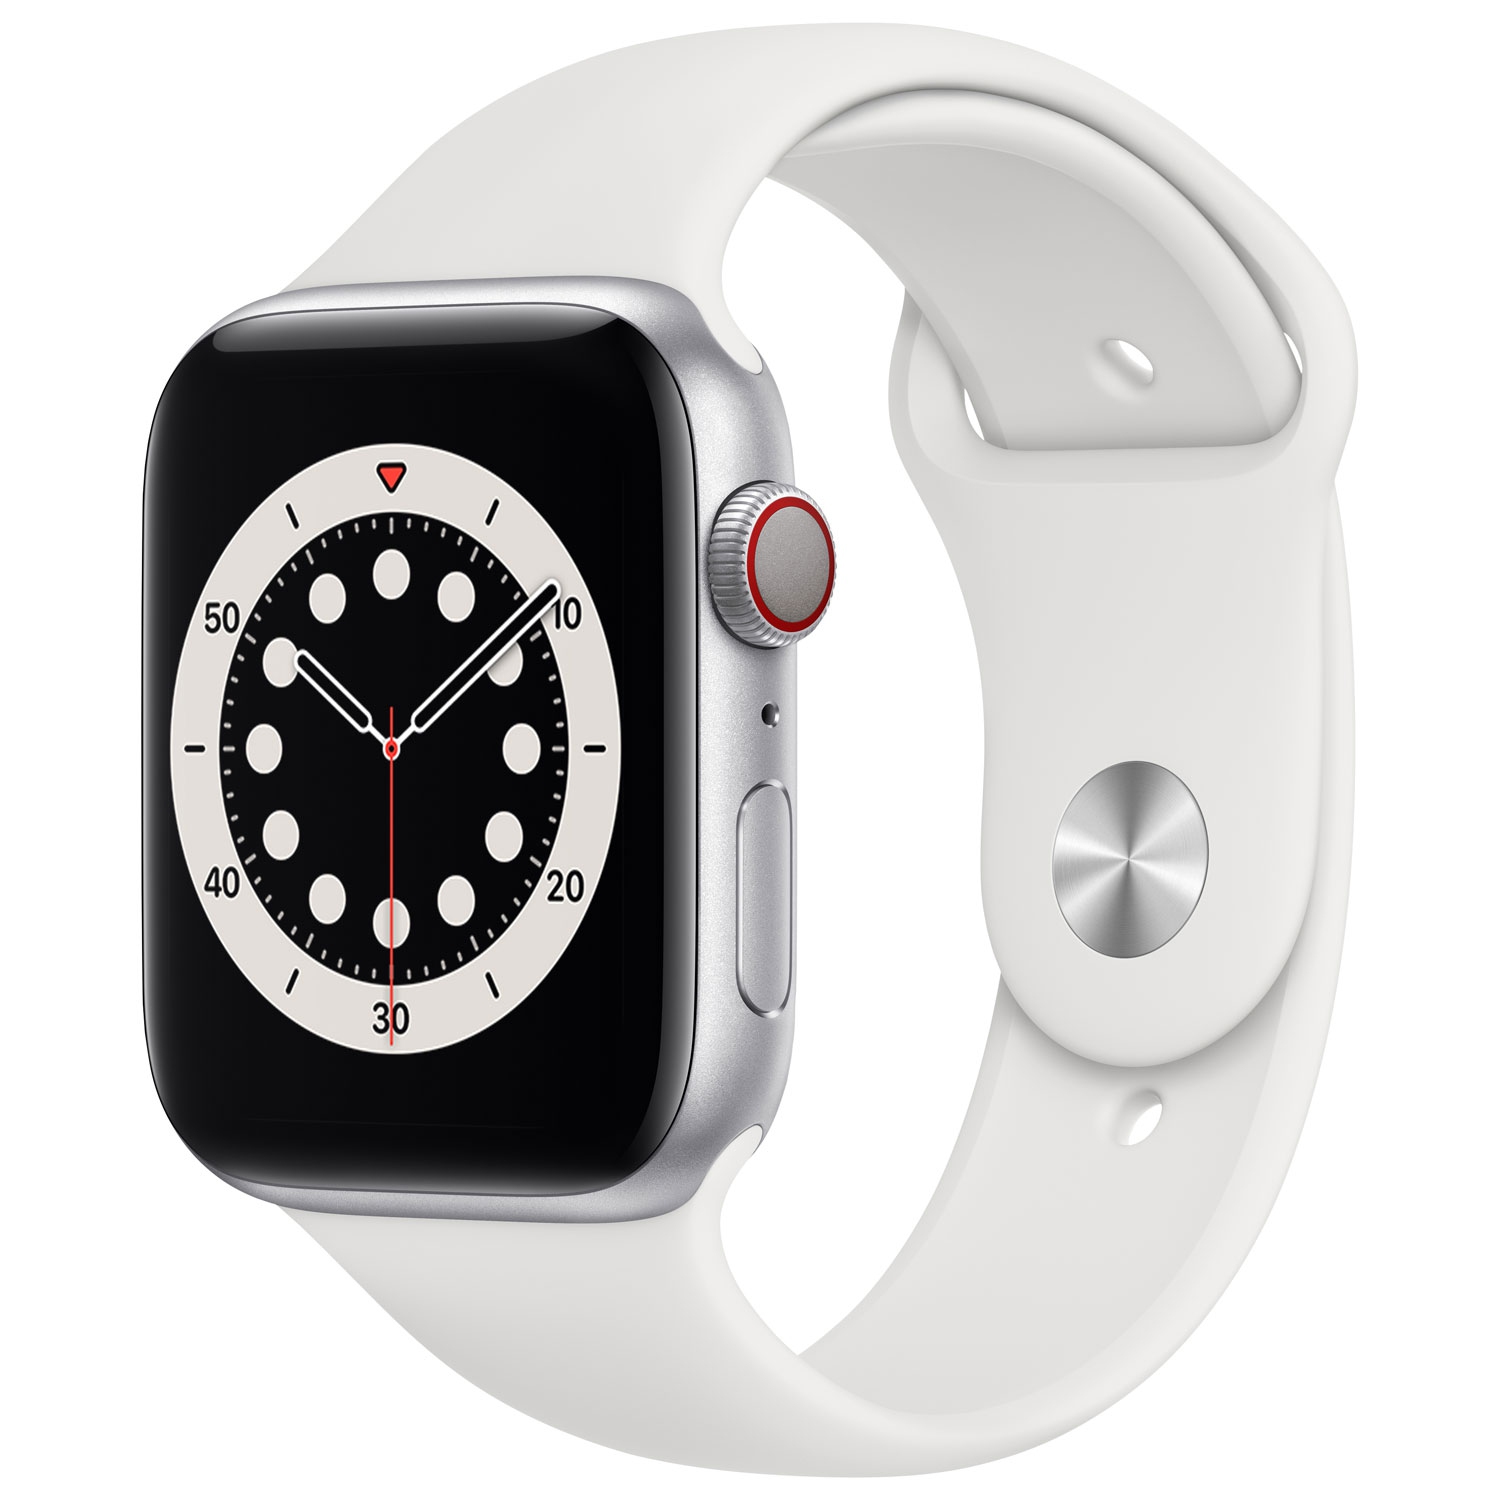 Refurbished (Fair) - Apple Watch Series 6 (GPS + Cellular) 44mm Silver Aluminum Case with White Sport Band